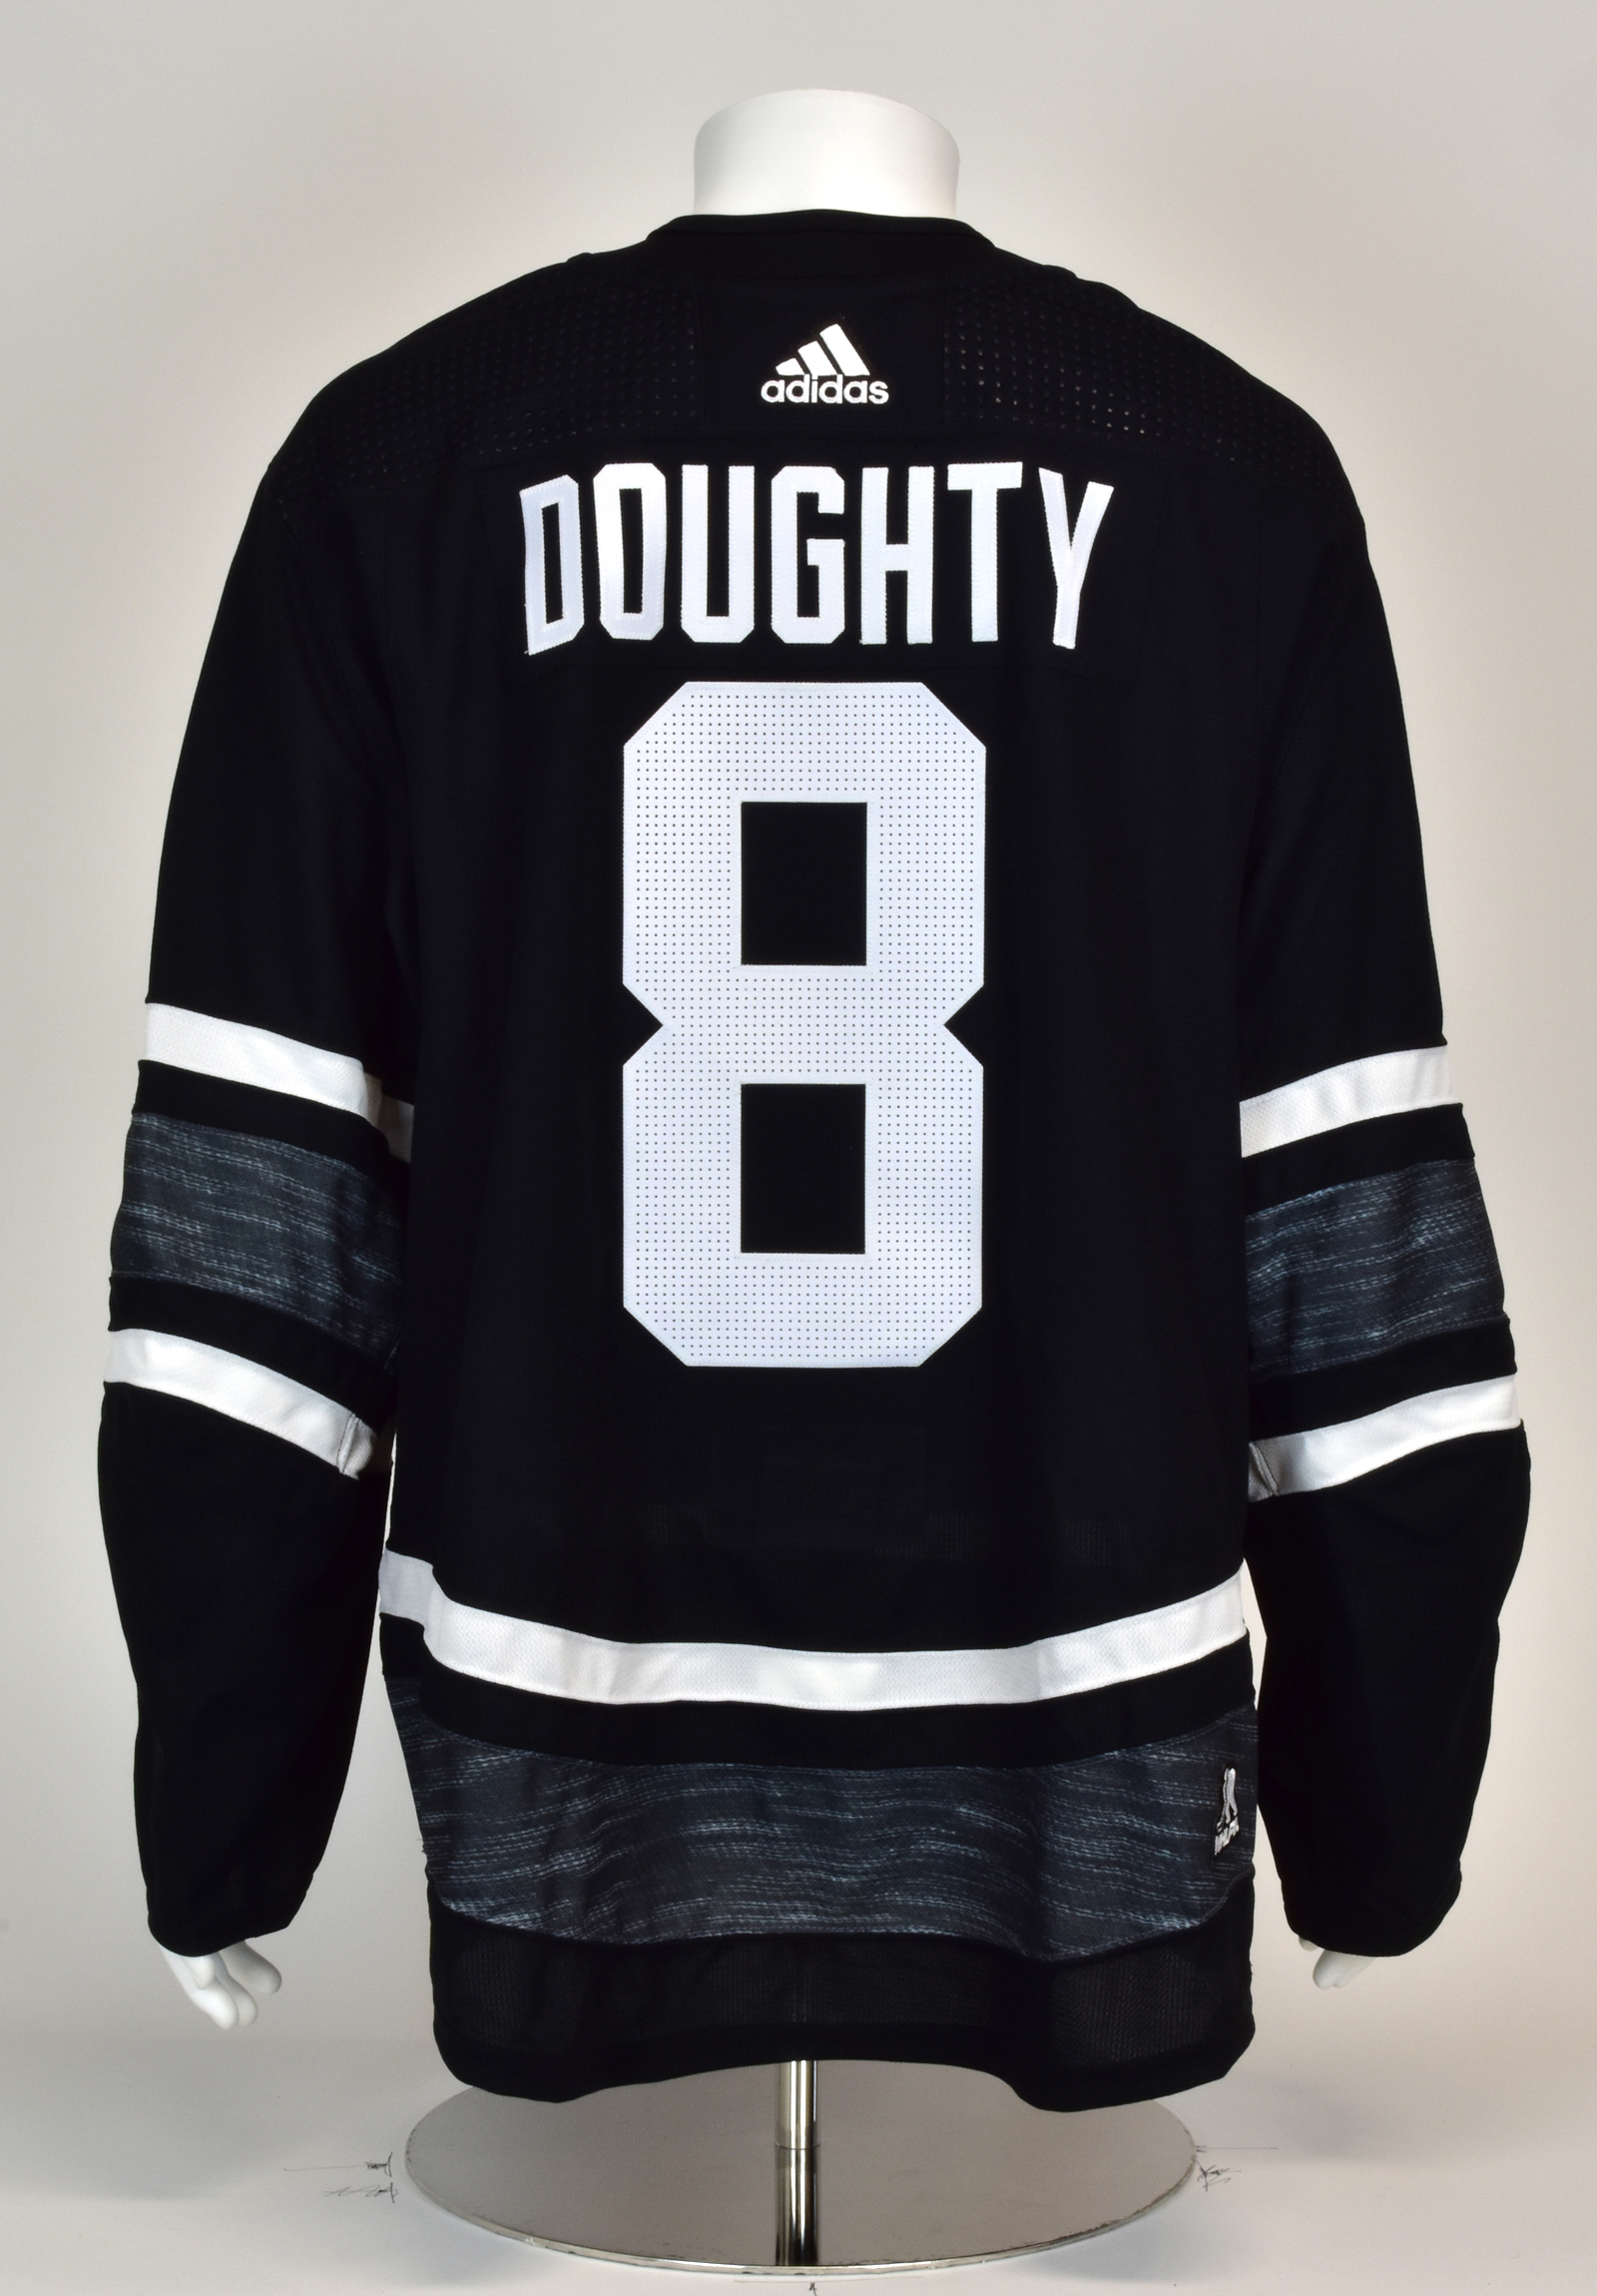 doughty all star jersey